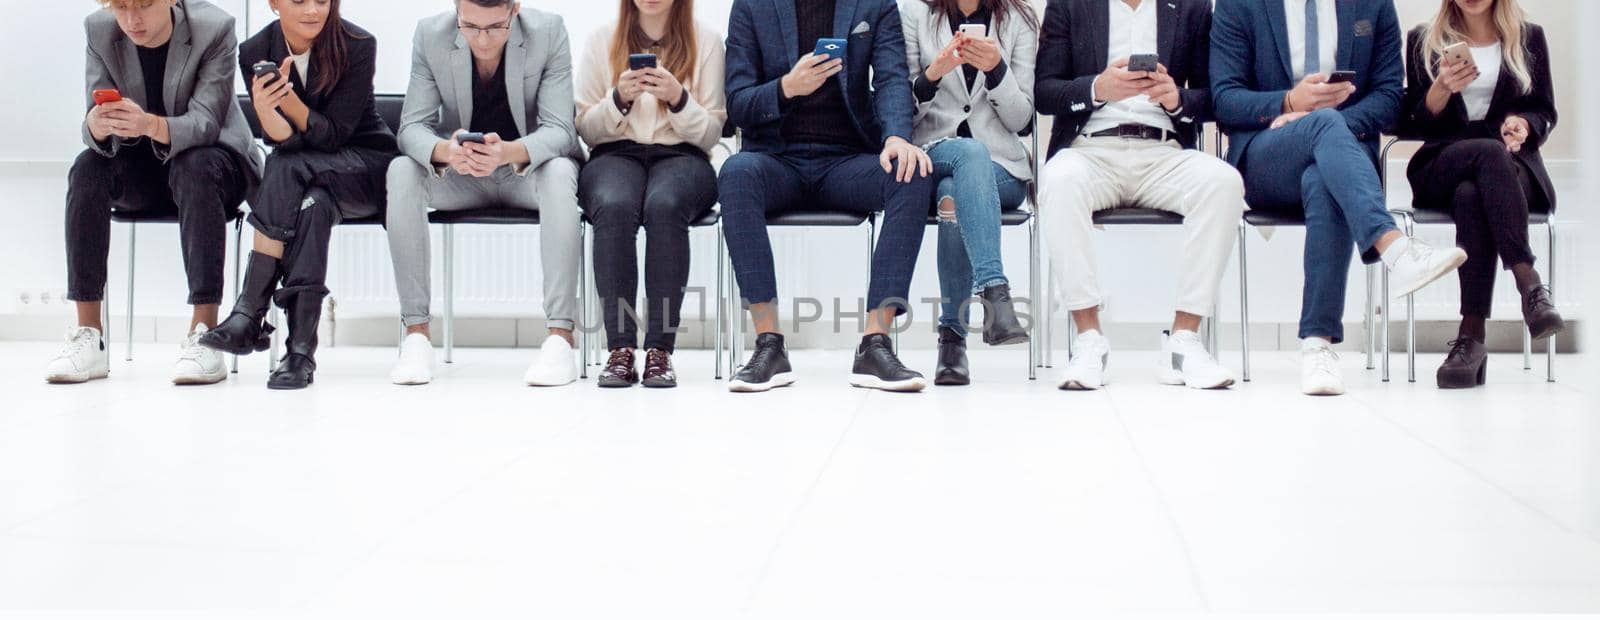 group of diverse young business people looking at their smartphone screens. photo with copy space